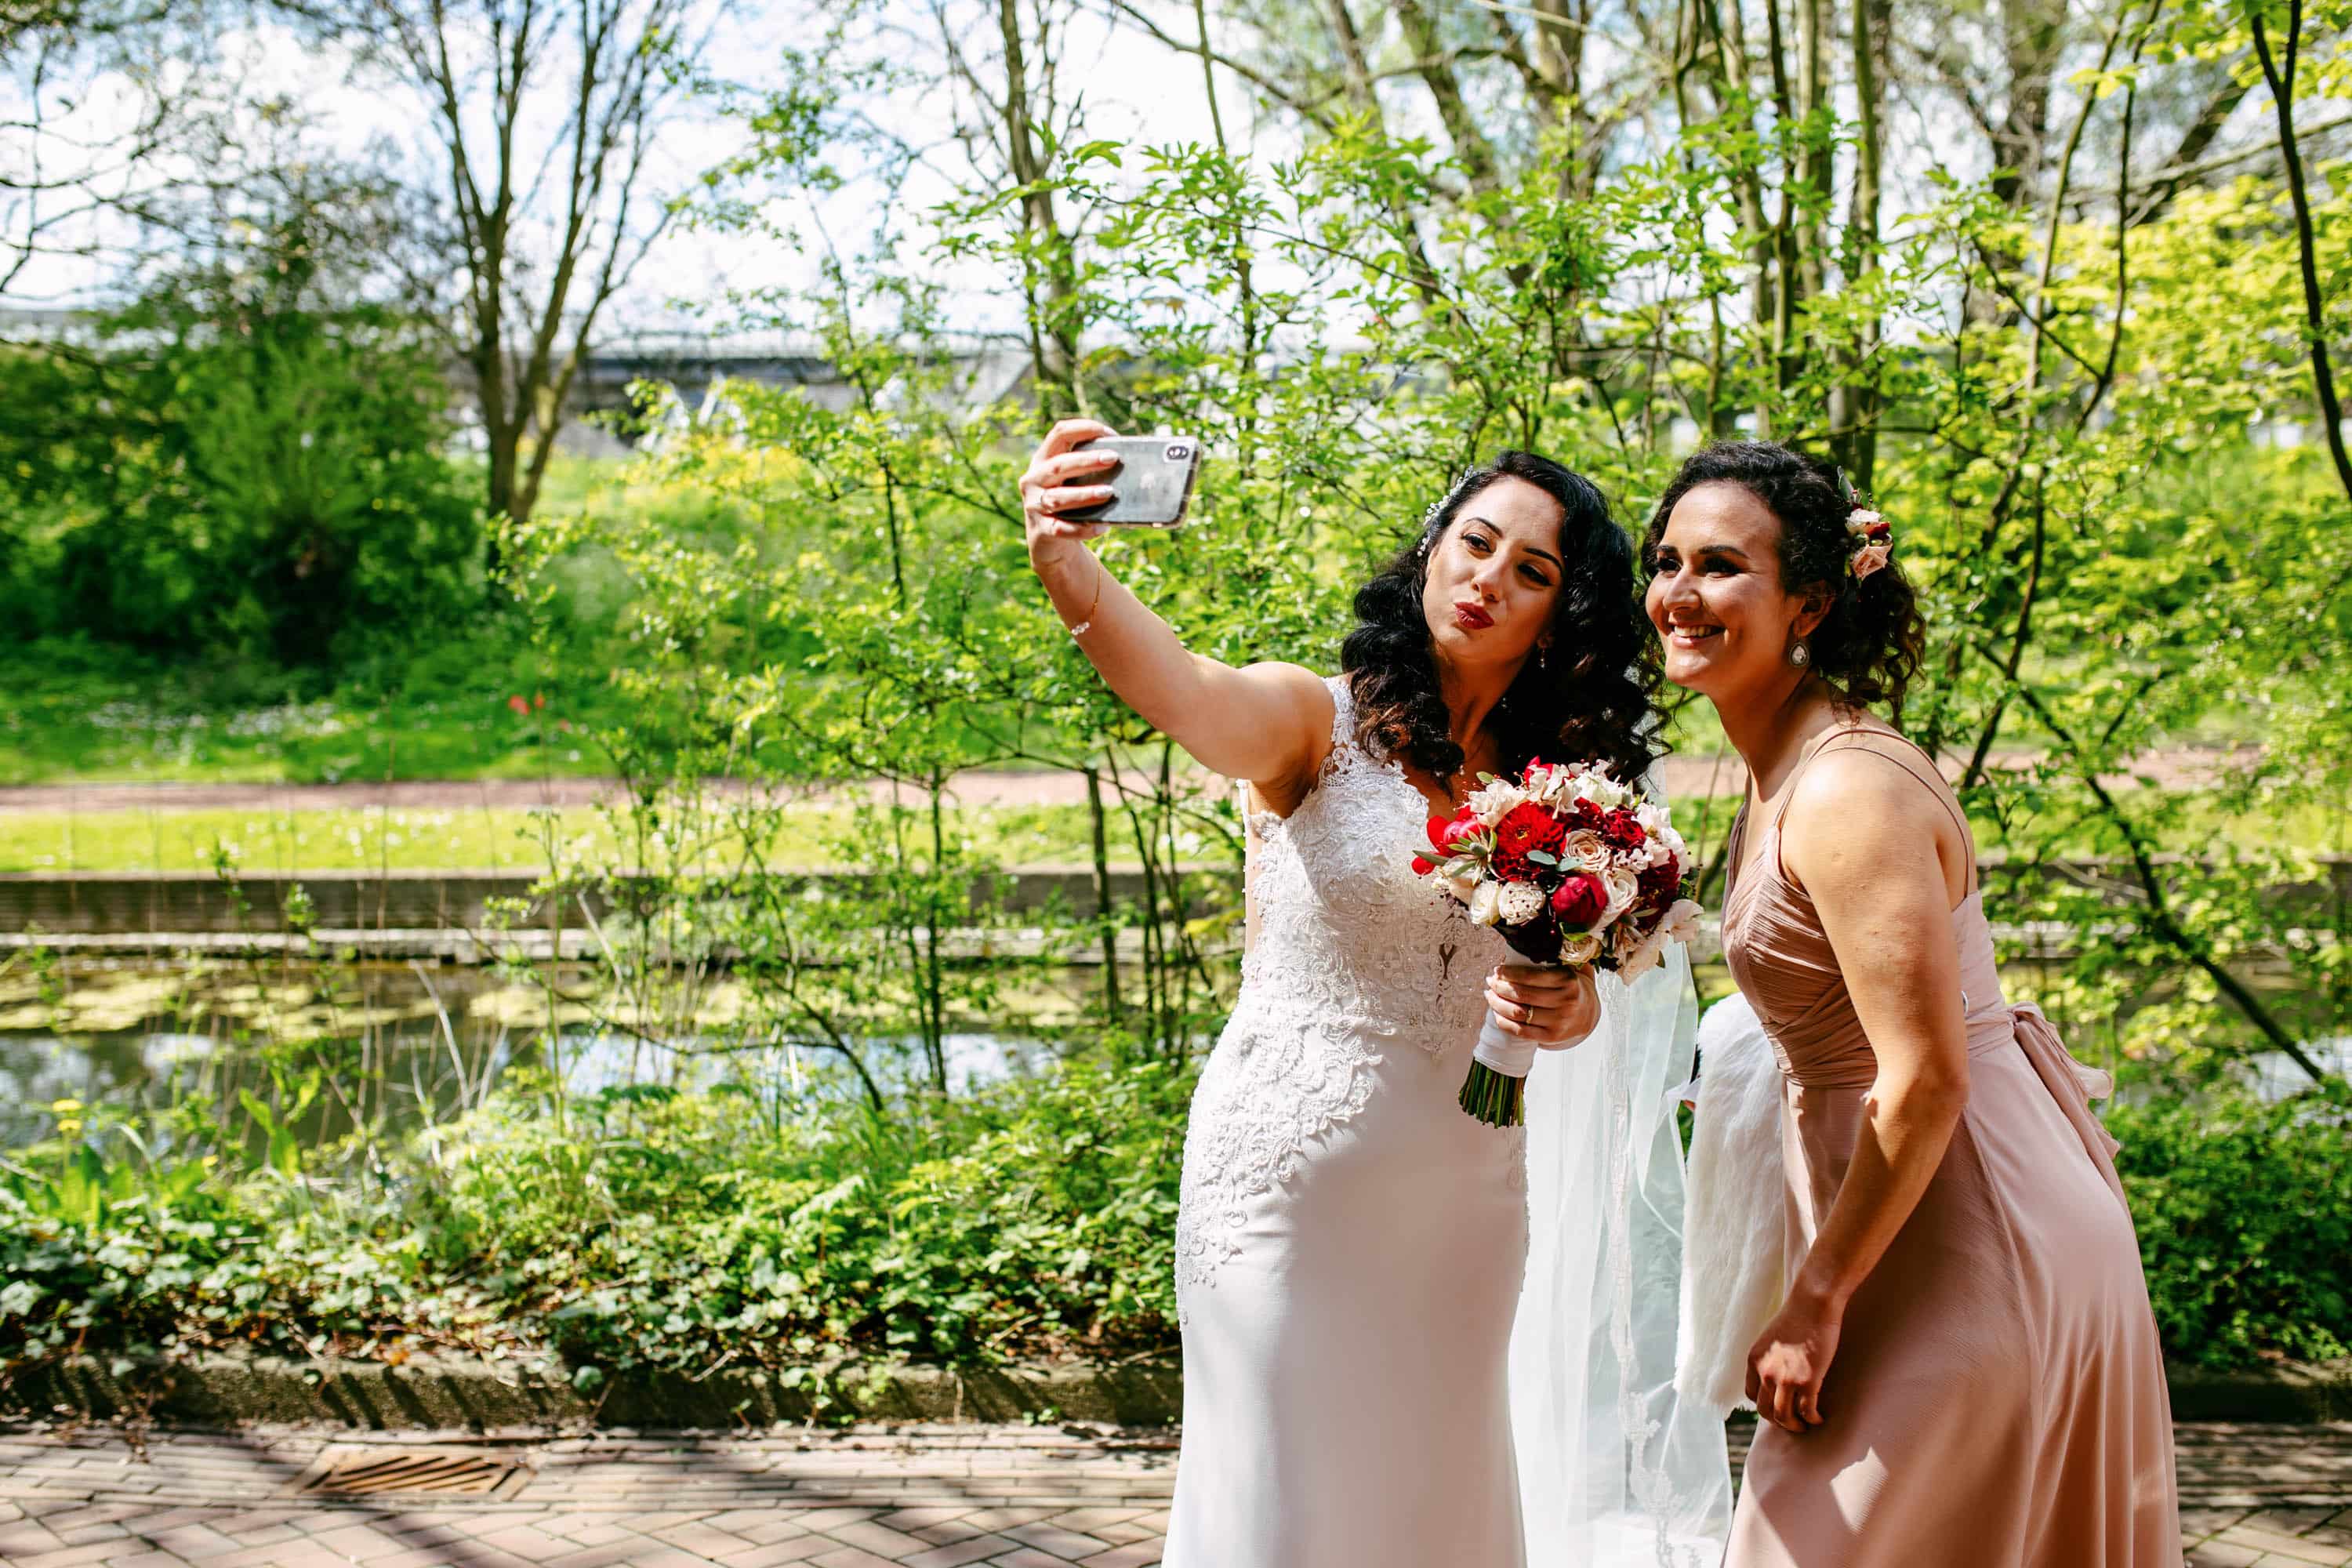 Two bridesmaids taking a selfie in a park.